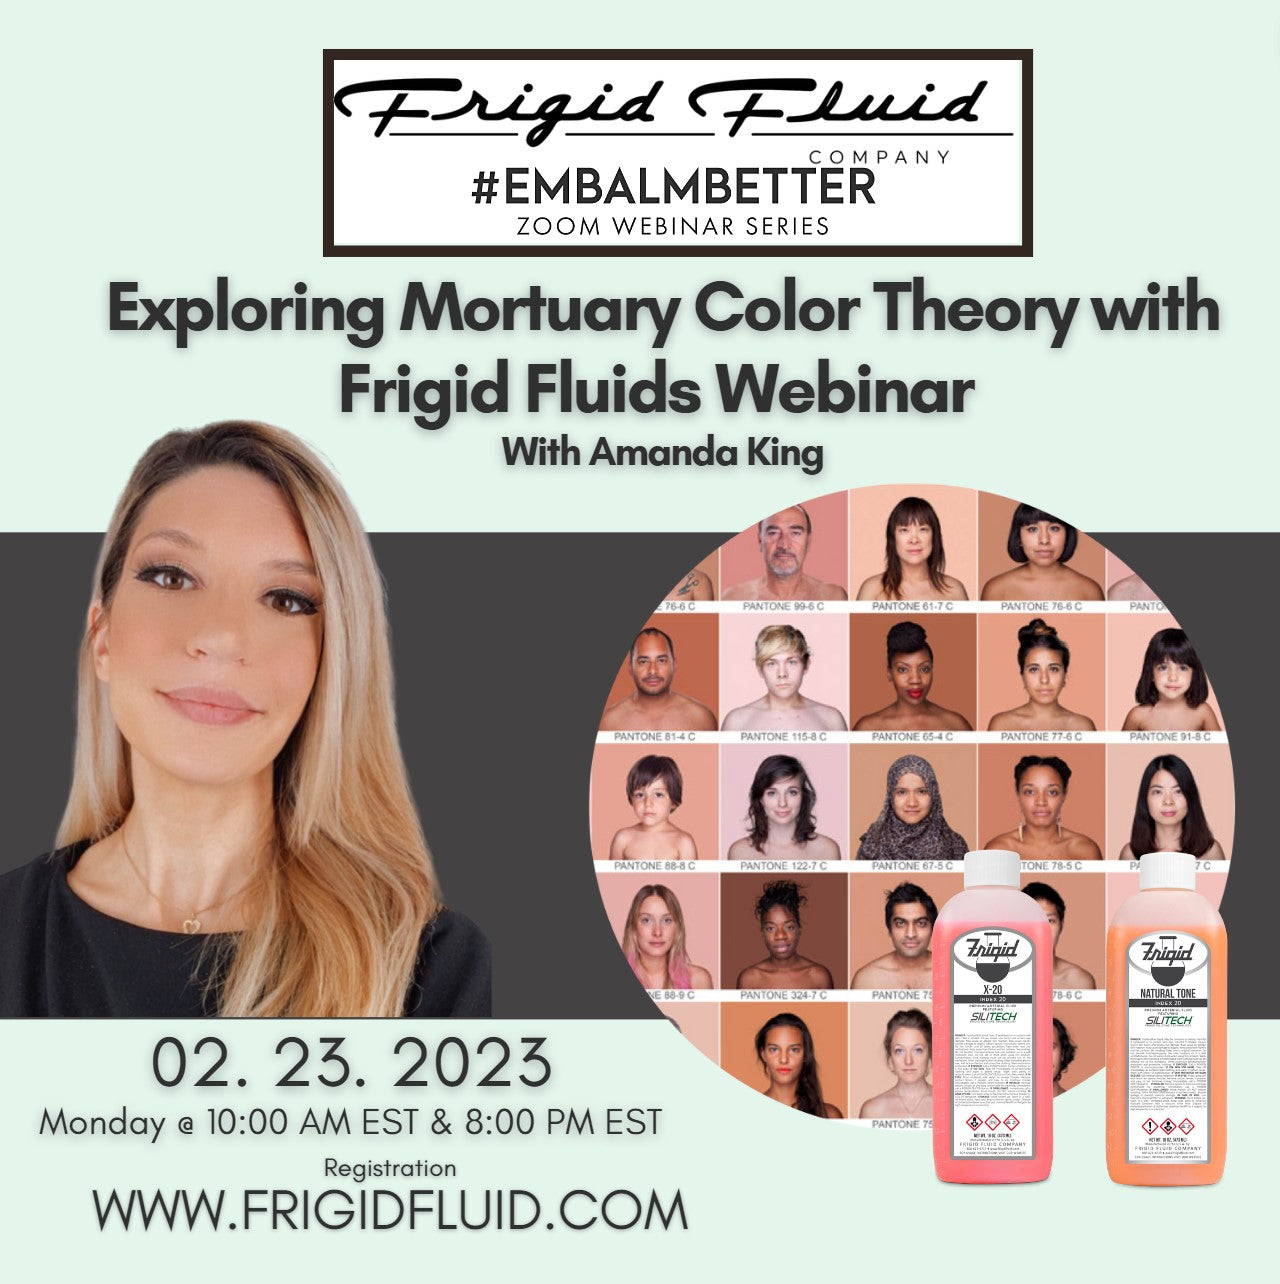 Exploring Mortuary Color Theory with Frigid Fluids Webinar with Amanda King 8pm Session